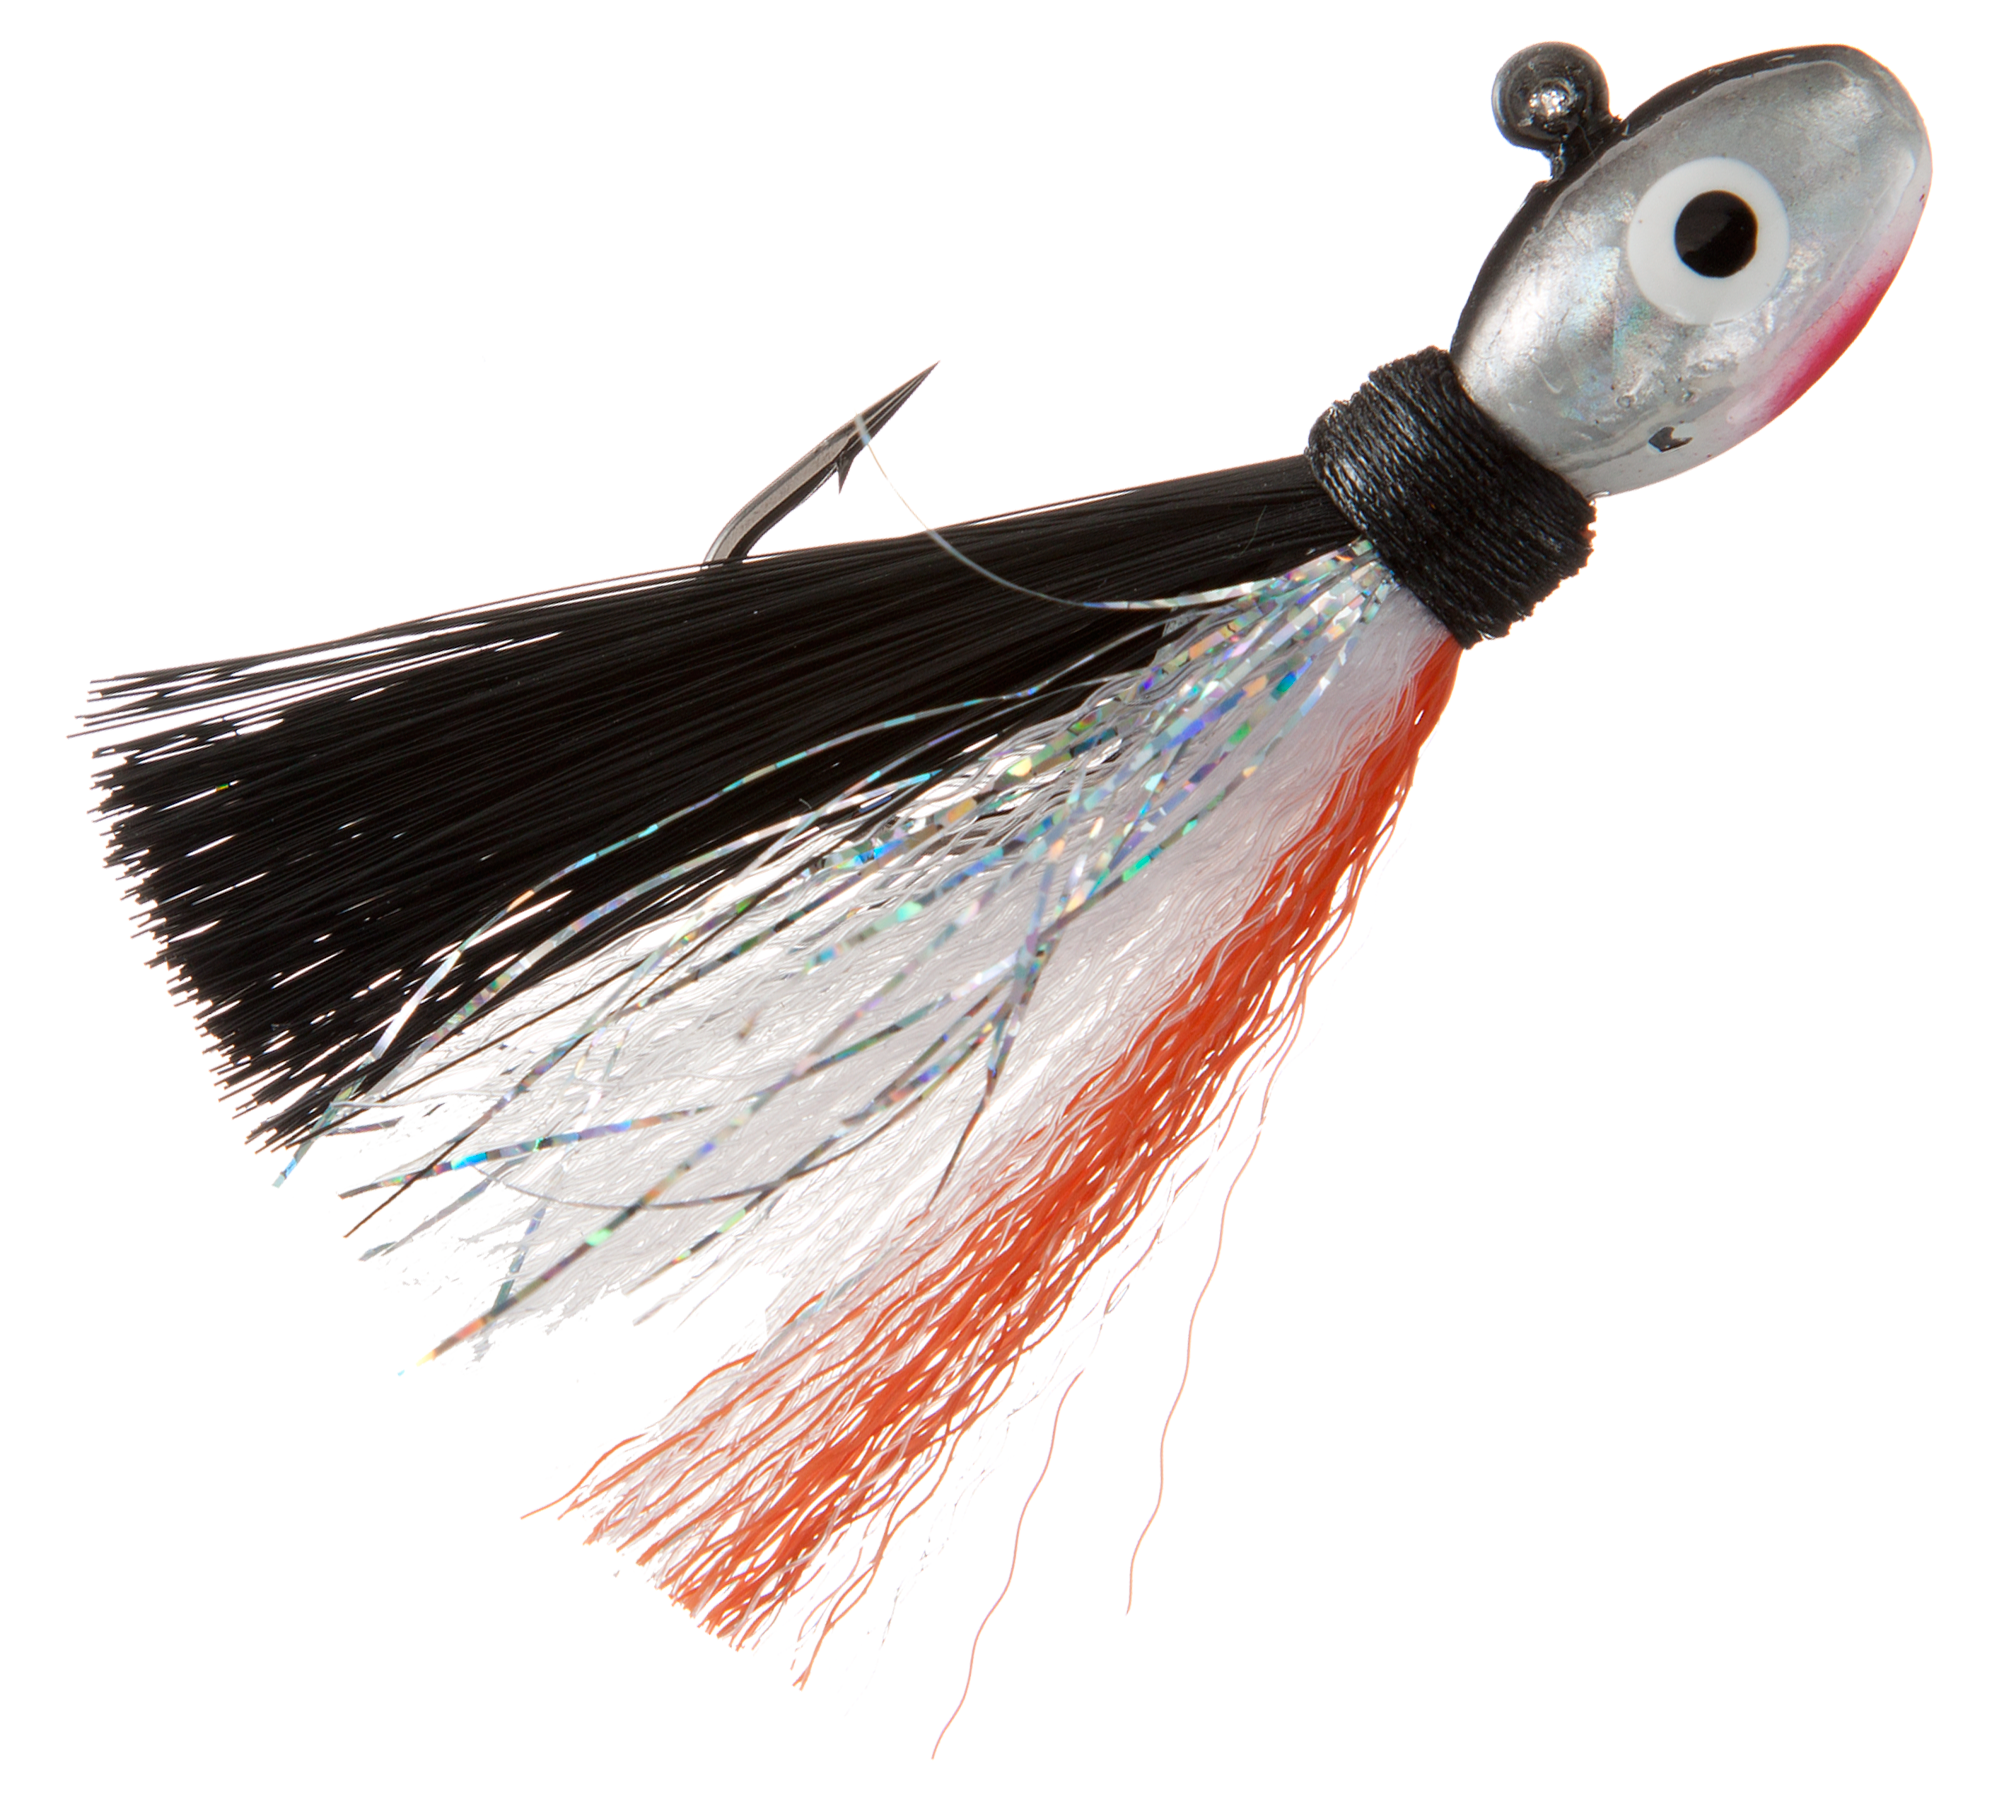 Offshore Angler Deluxe Pompano Jigs - 1/2 oz. - Natural Shad